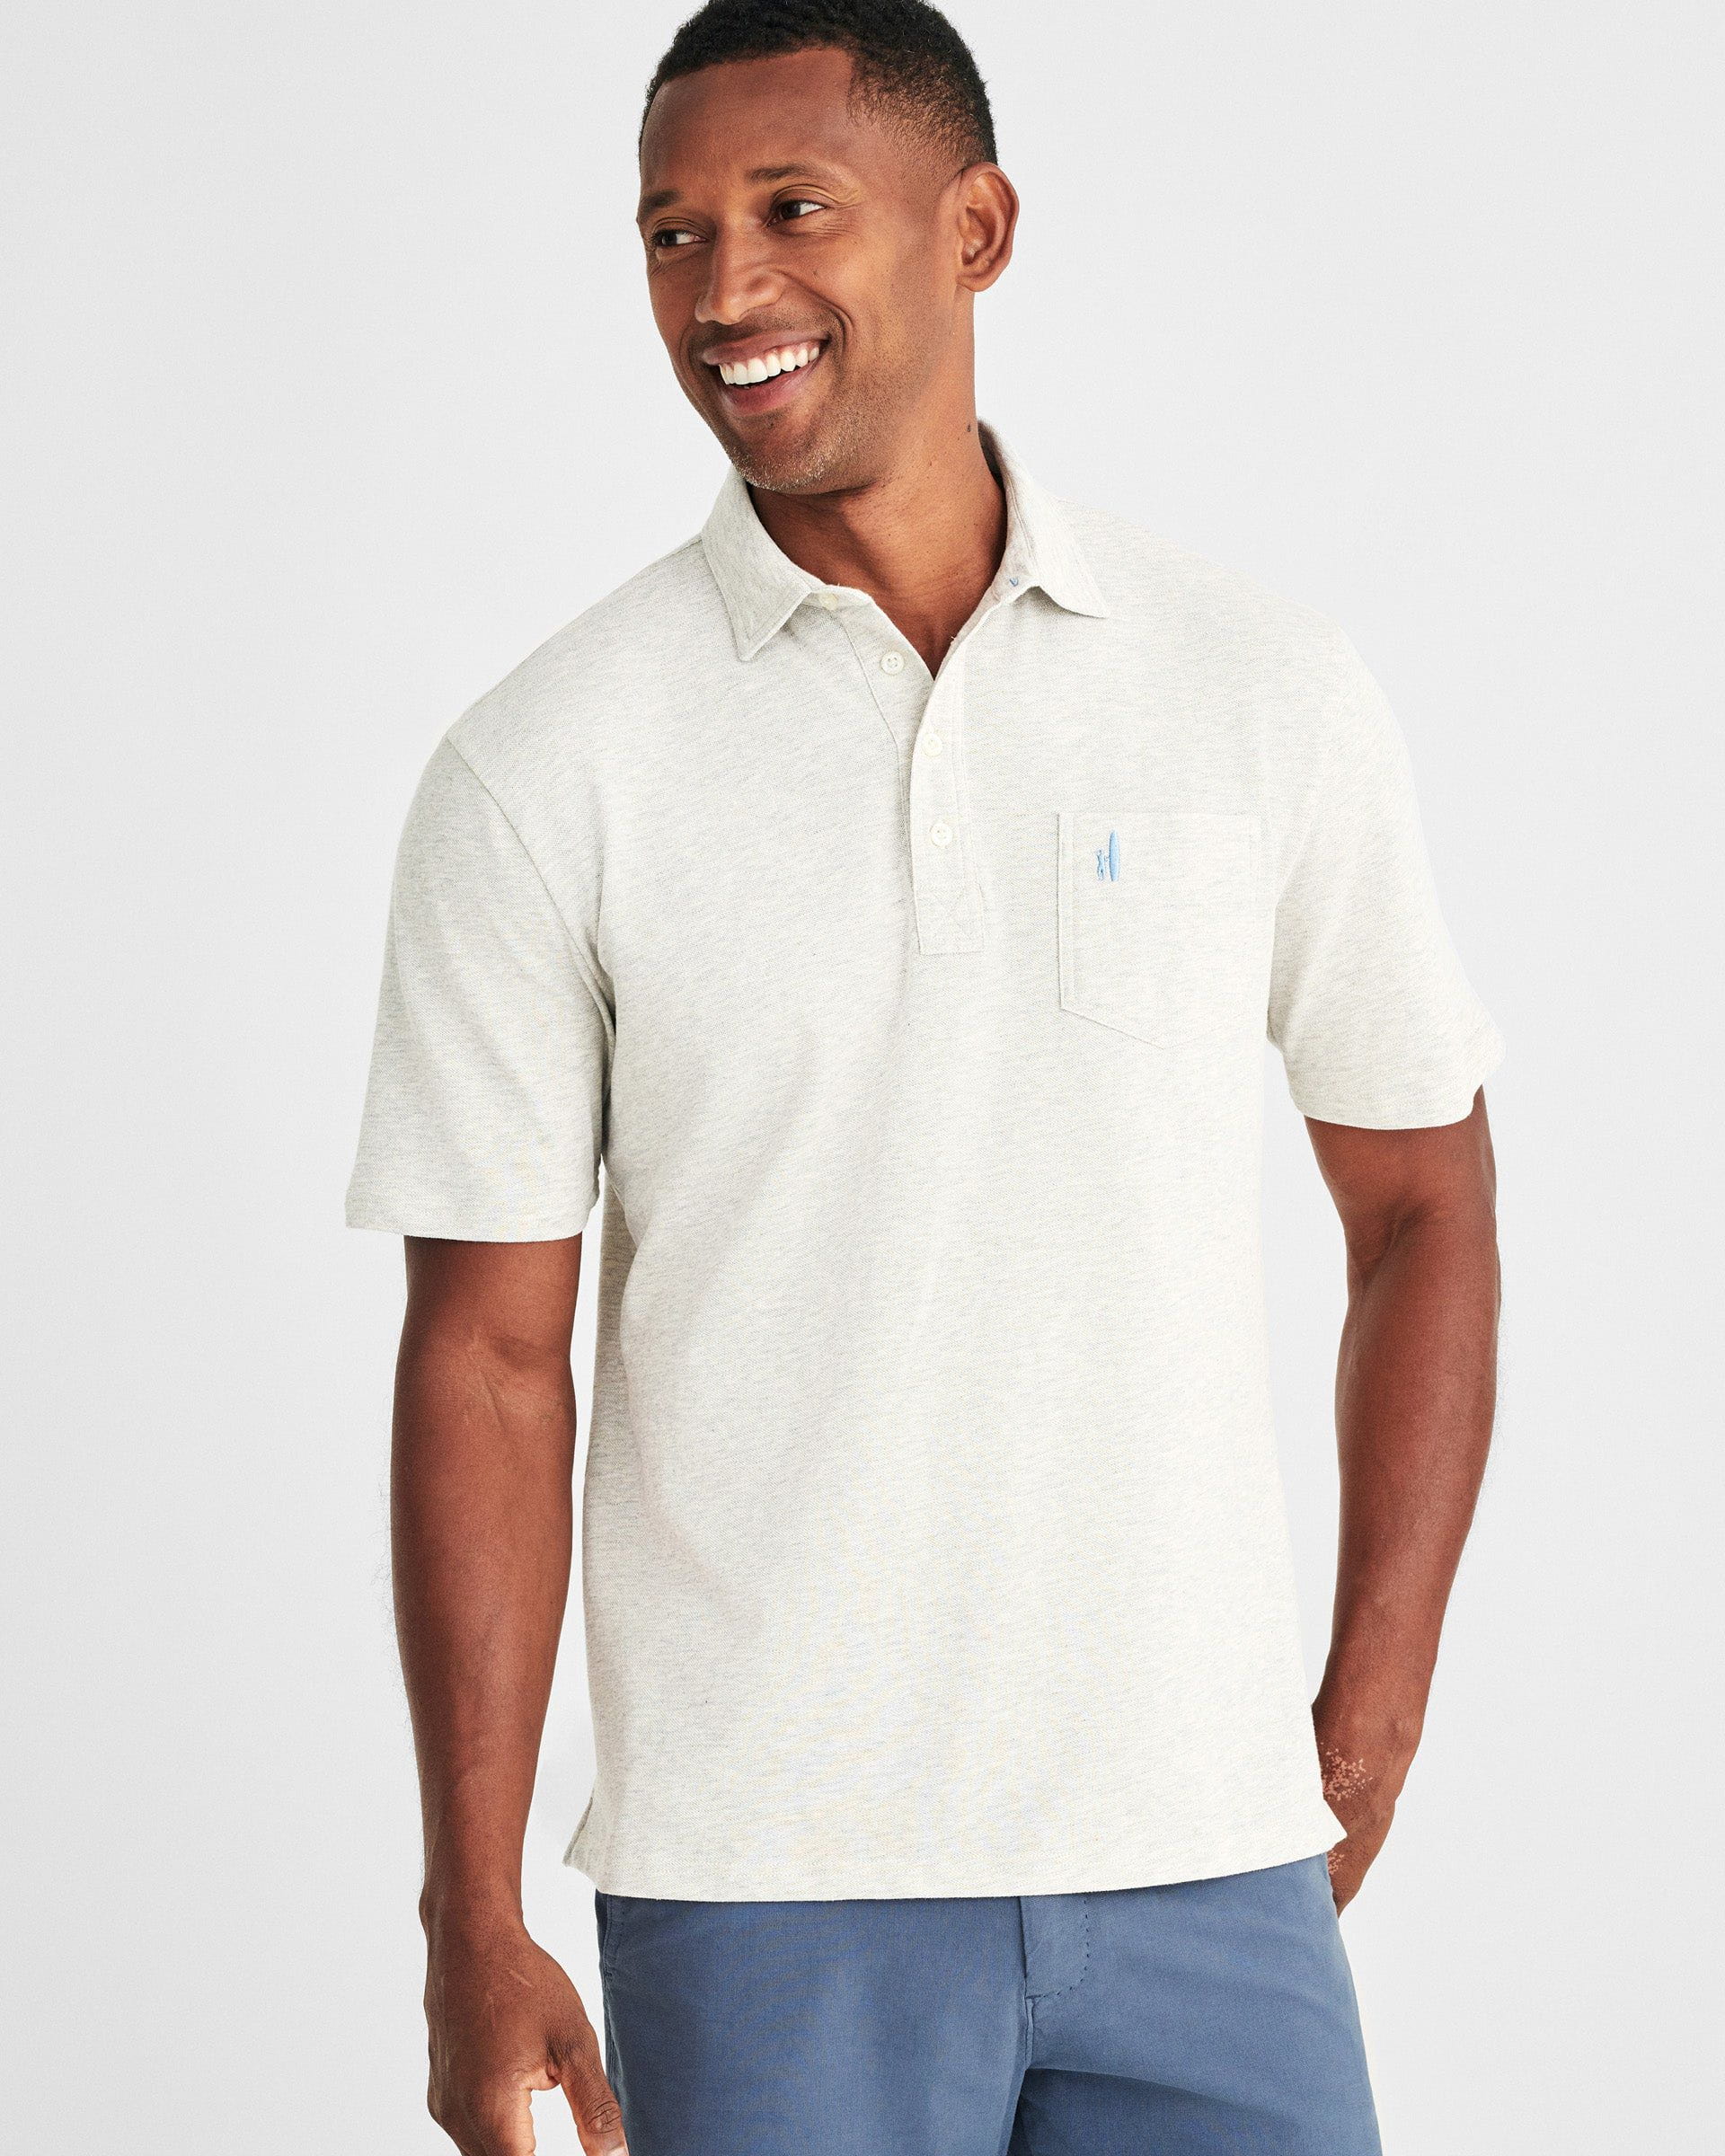 Men's Casual Lightweight, Soft Polo For The Office · johnnie-O